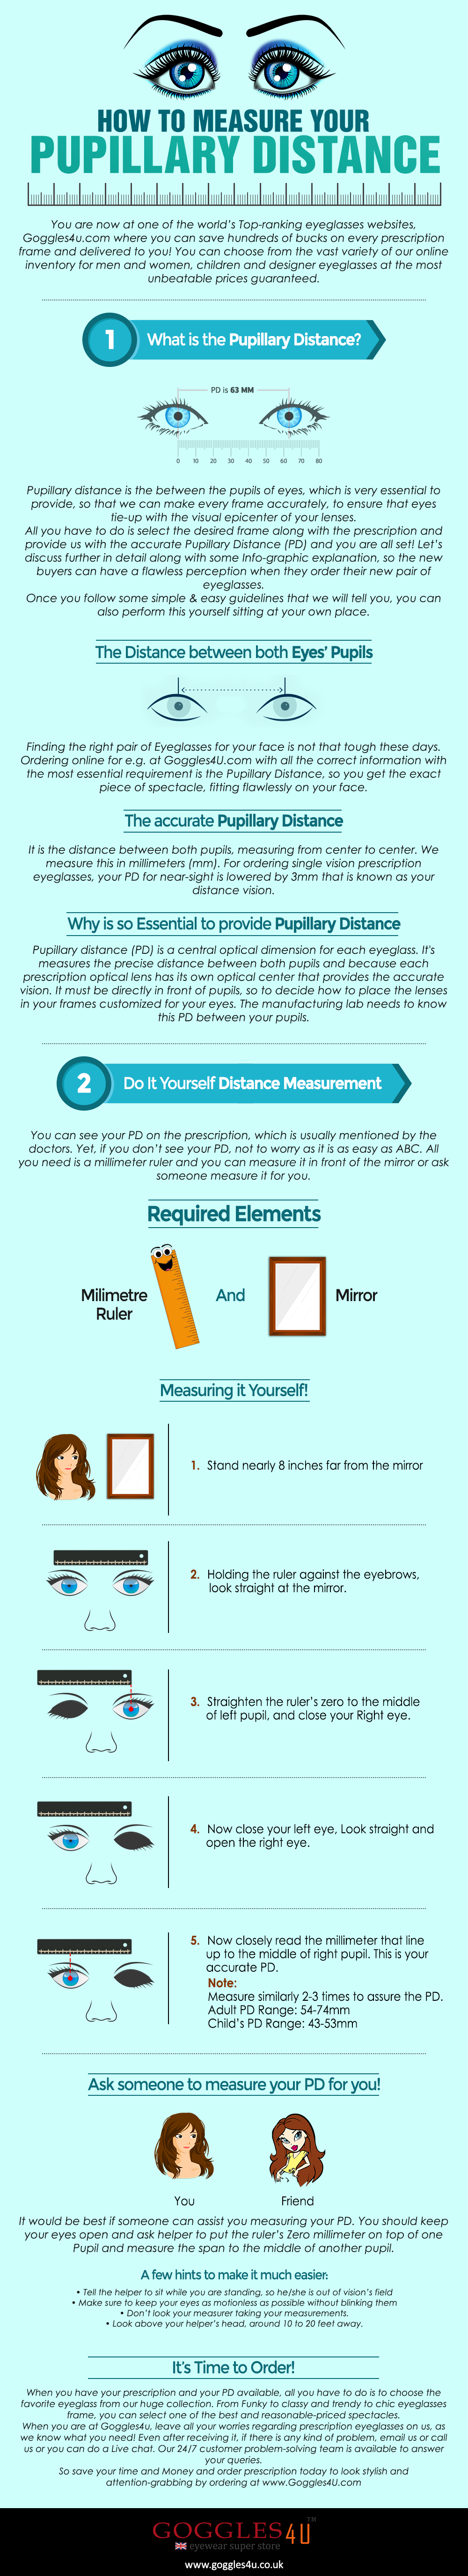 How To Measure Your Pupillary Distance